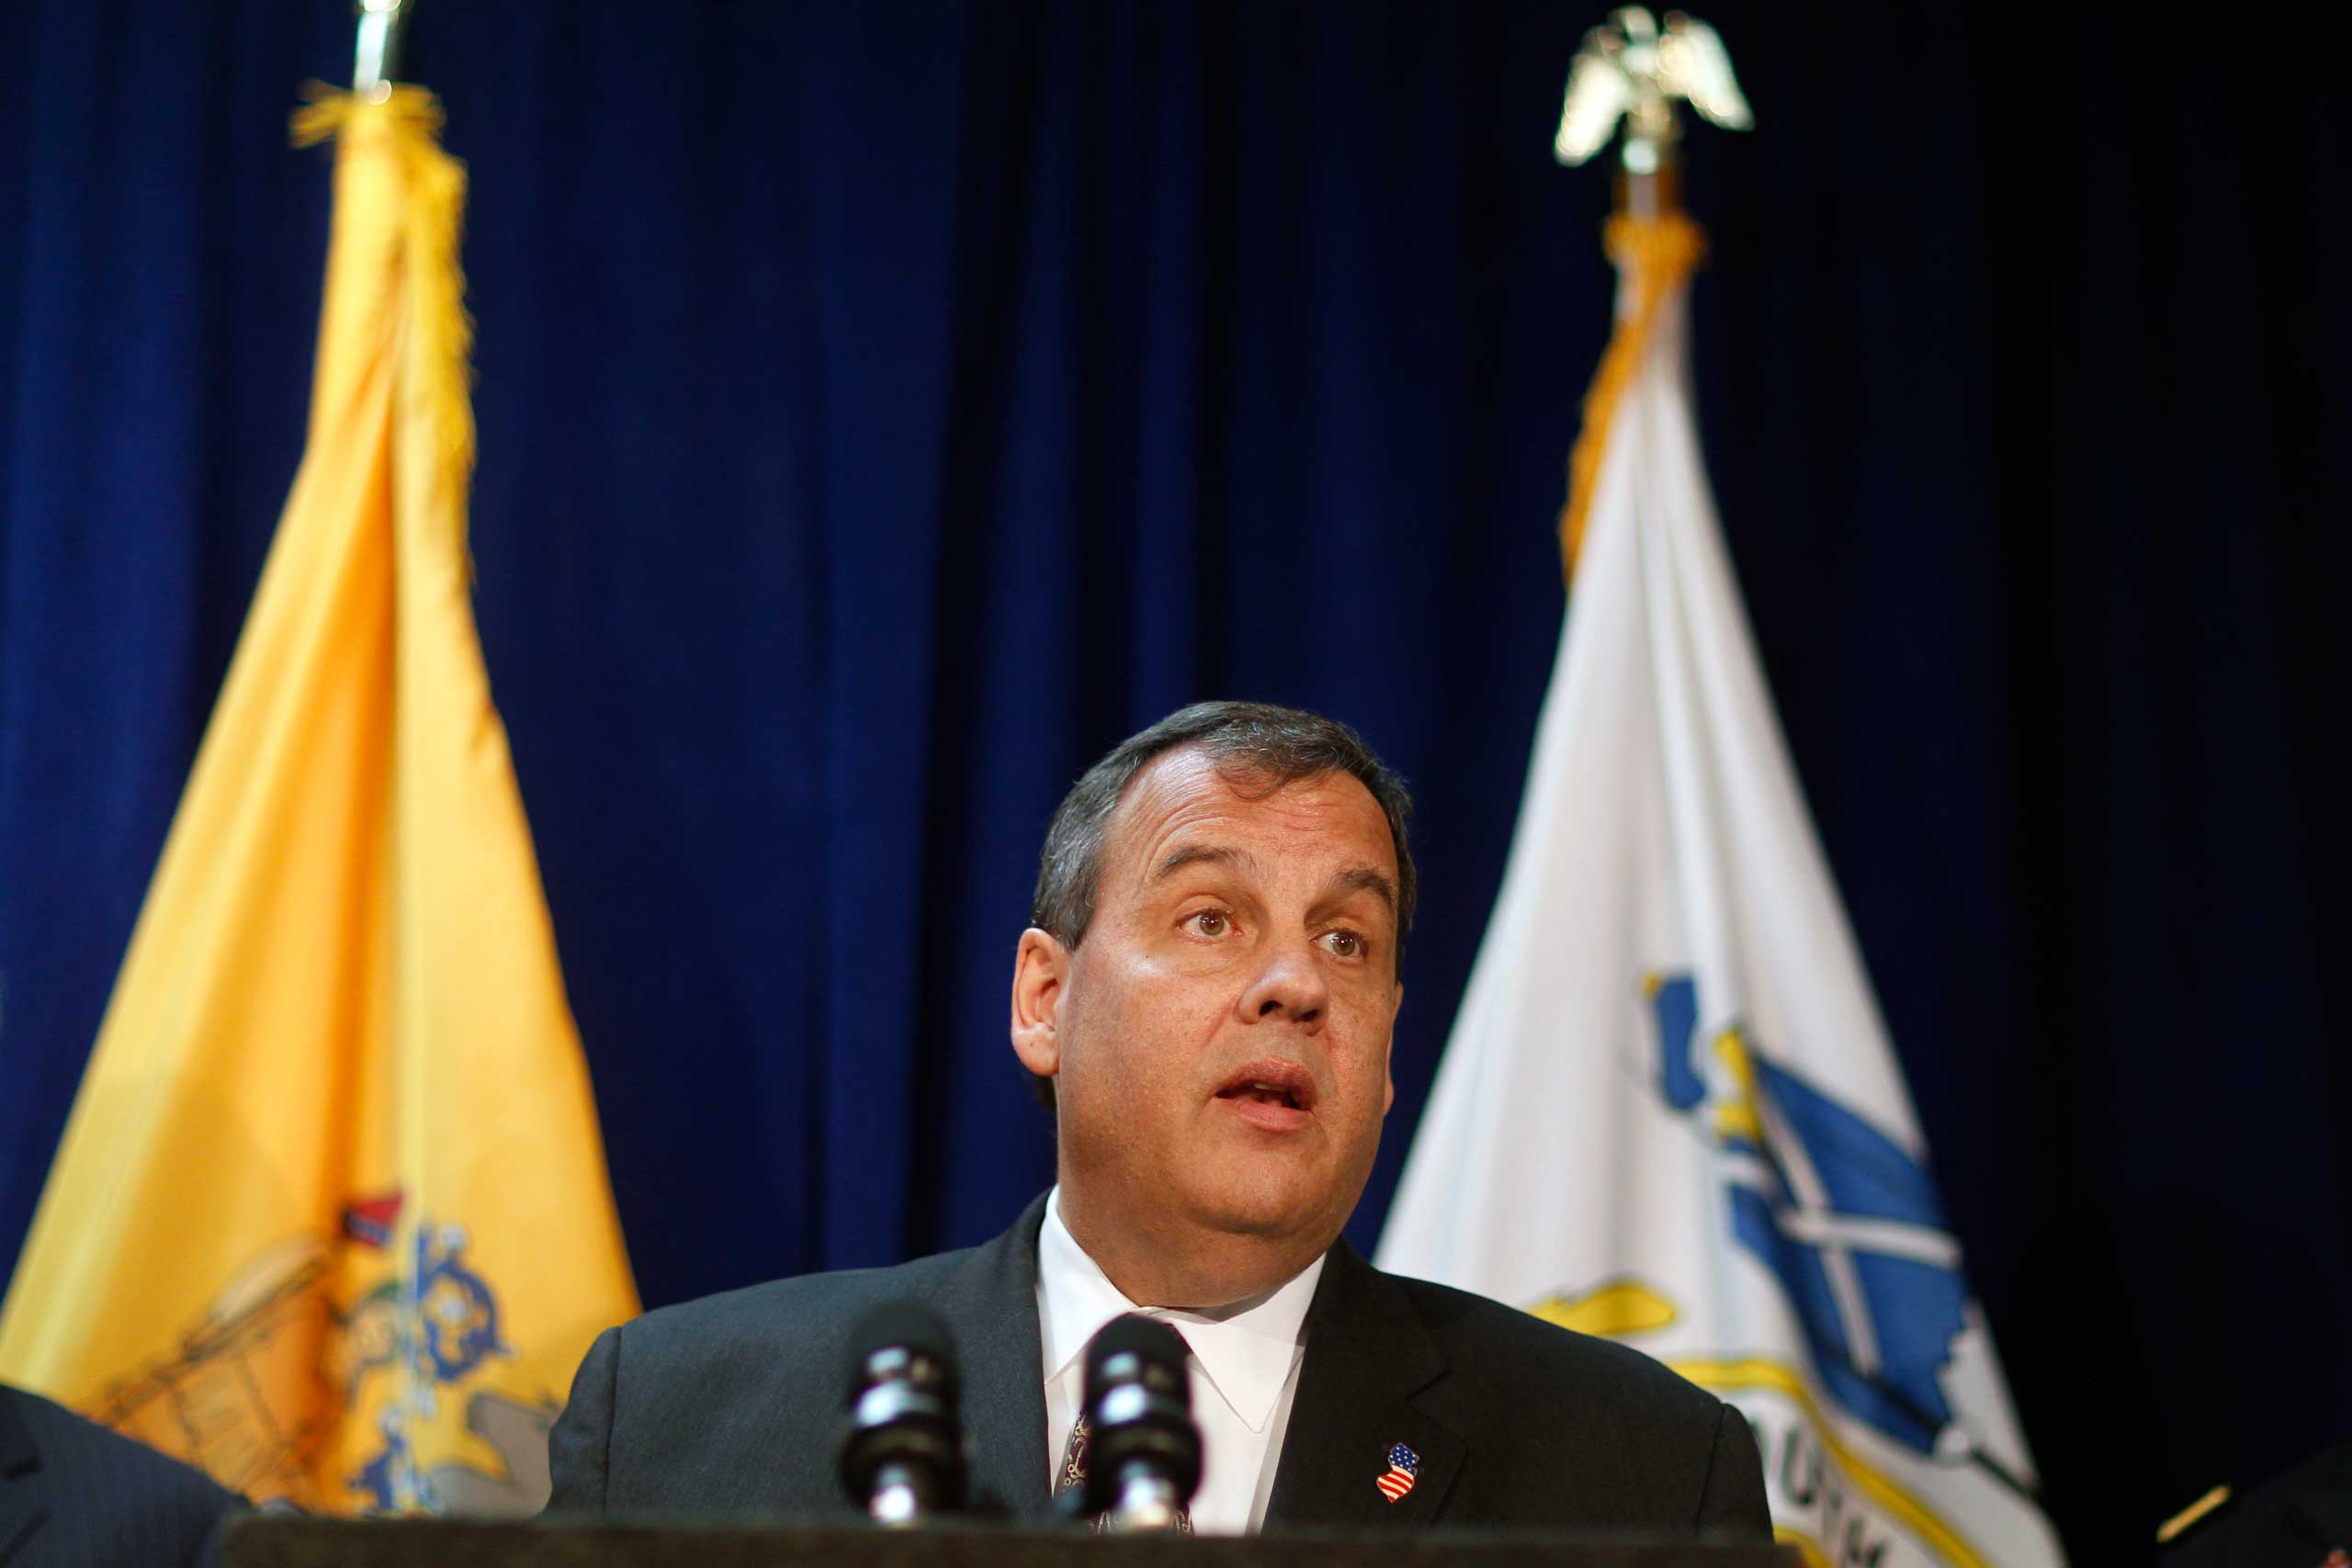 In this April 8, 2015 file photo, New Jersey Gov. Chris Christie addresses a gathering as he announces a $202 million flood control project for Union Beach, N.J. (Mel Evans—AP)